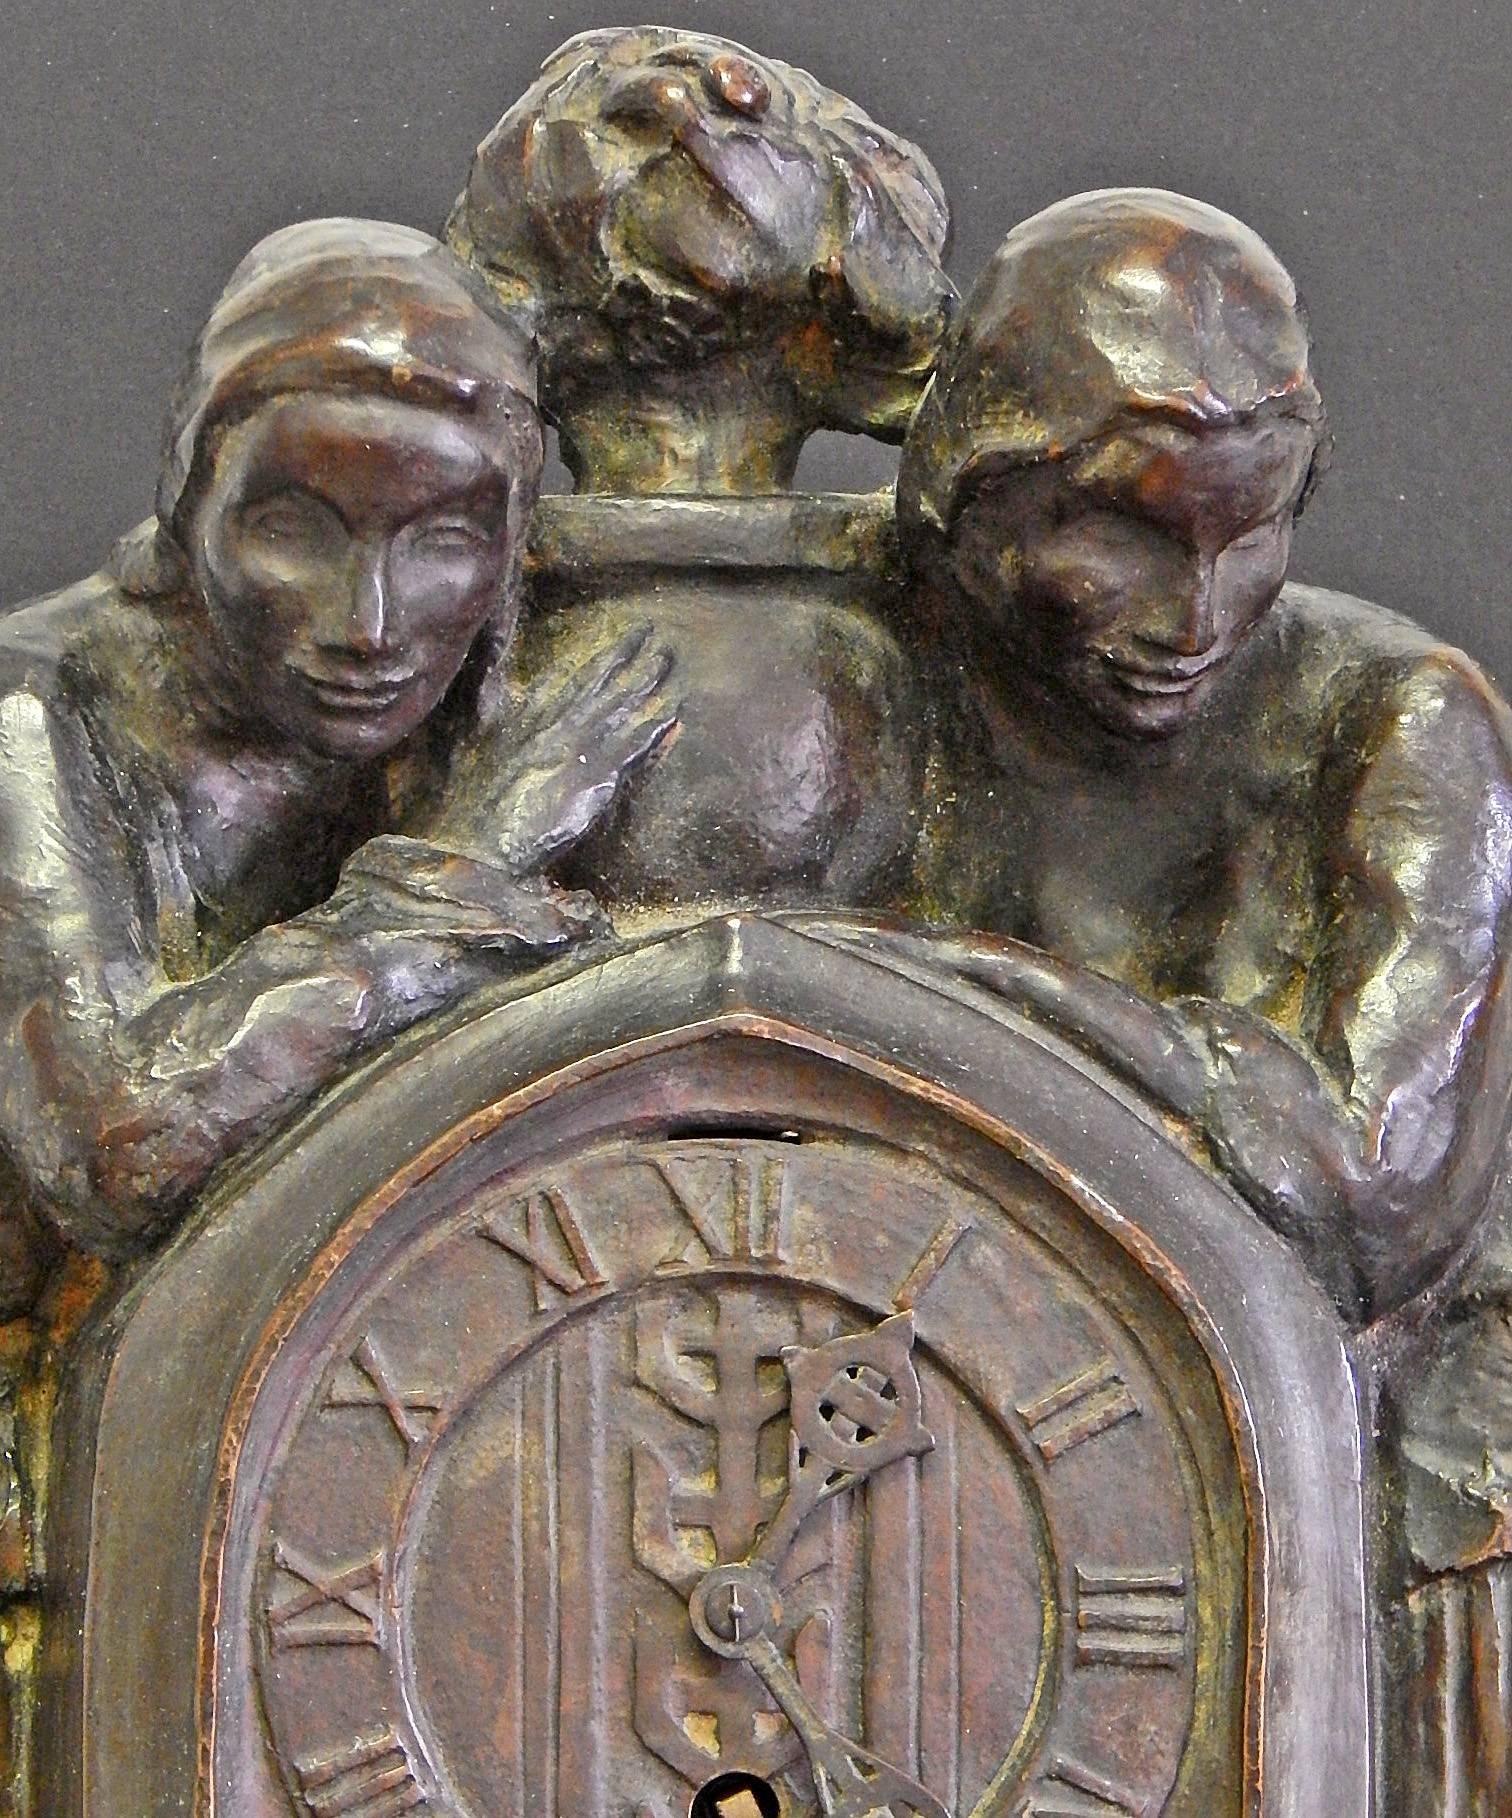 Extremely rare if not unique, this extraordinary timepiece may be the only sculpture-cum-clock ever cast by the Roman Bronze Works, America's premier bronze foundry in the early 20th century. The sculpture features two female figures with long,